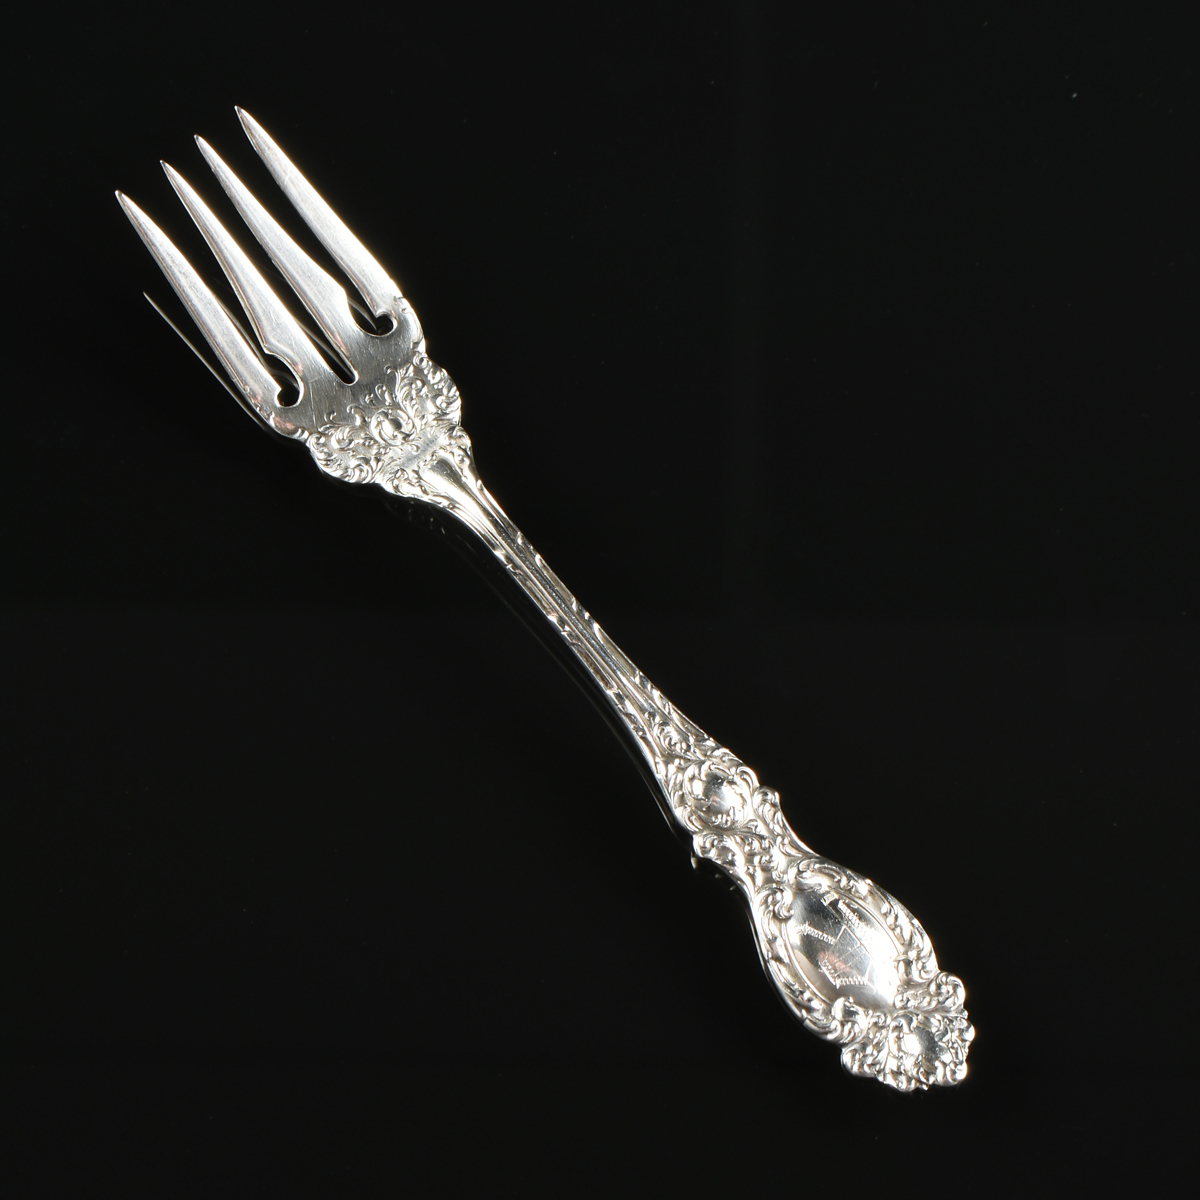 A FORTY-NINE PIECE R. WALLACE & SONS STERLING SILVER FLATWARE SERVICE, LUCERNE PATTERN, MARKED, - Image 5 of 5